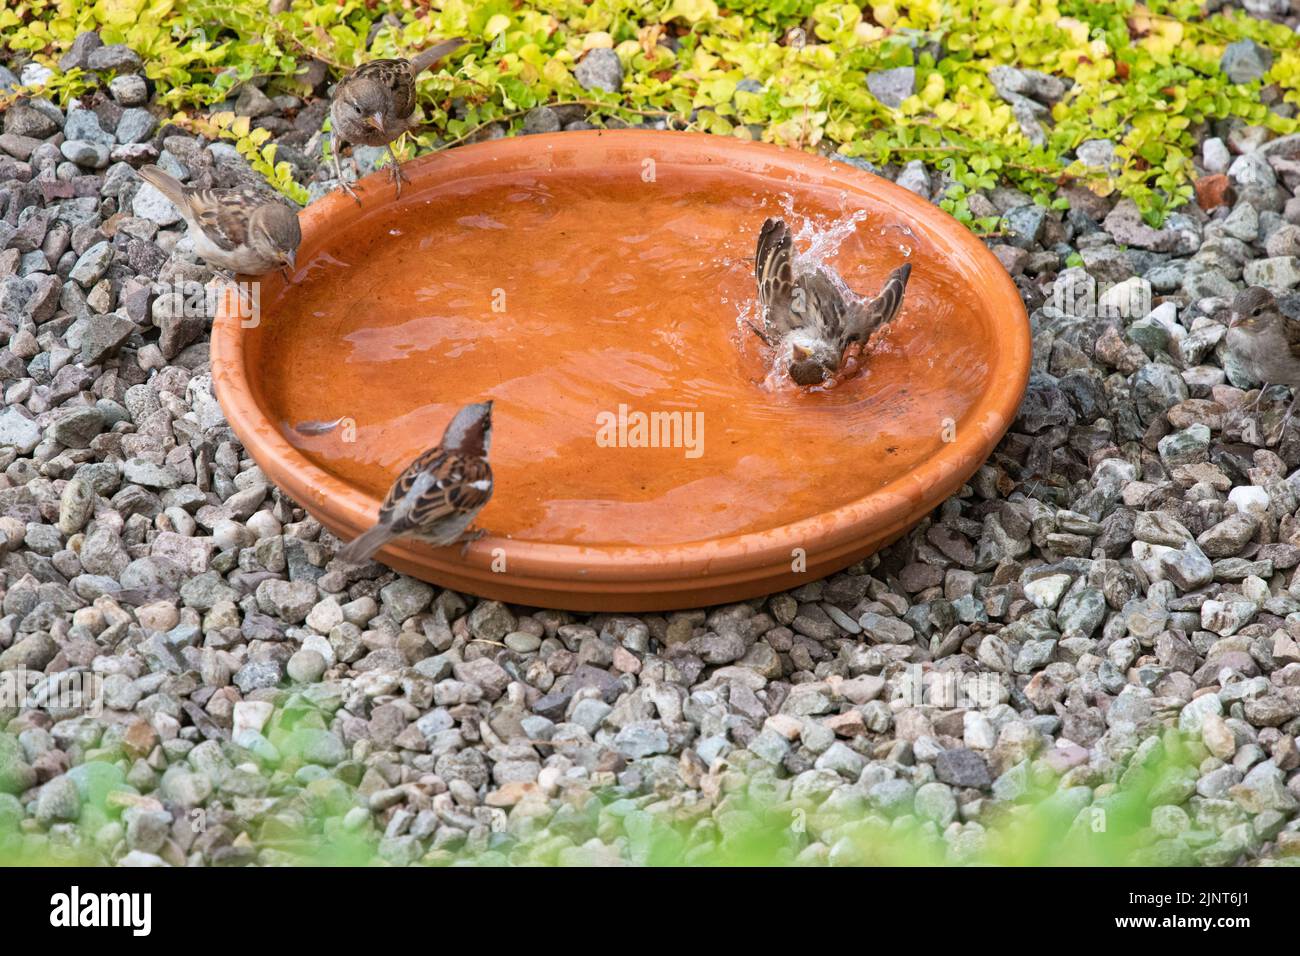 house sparrows bathing and drinking in bird bath Stock Photo